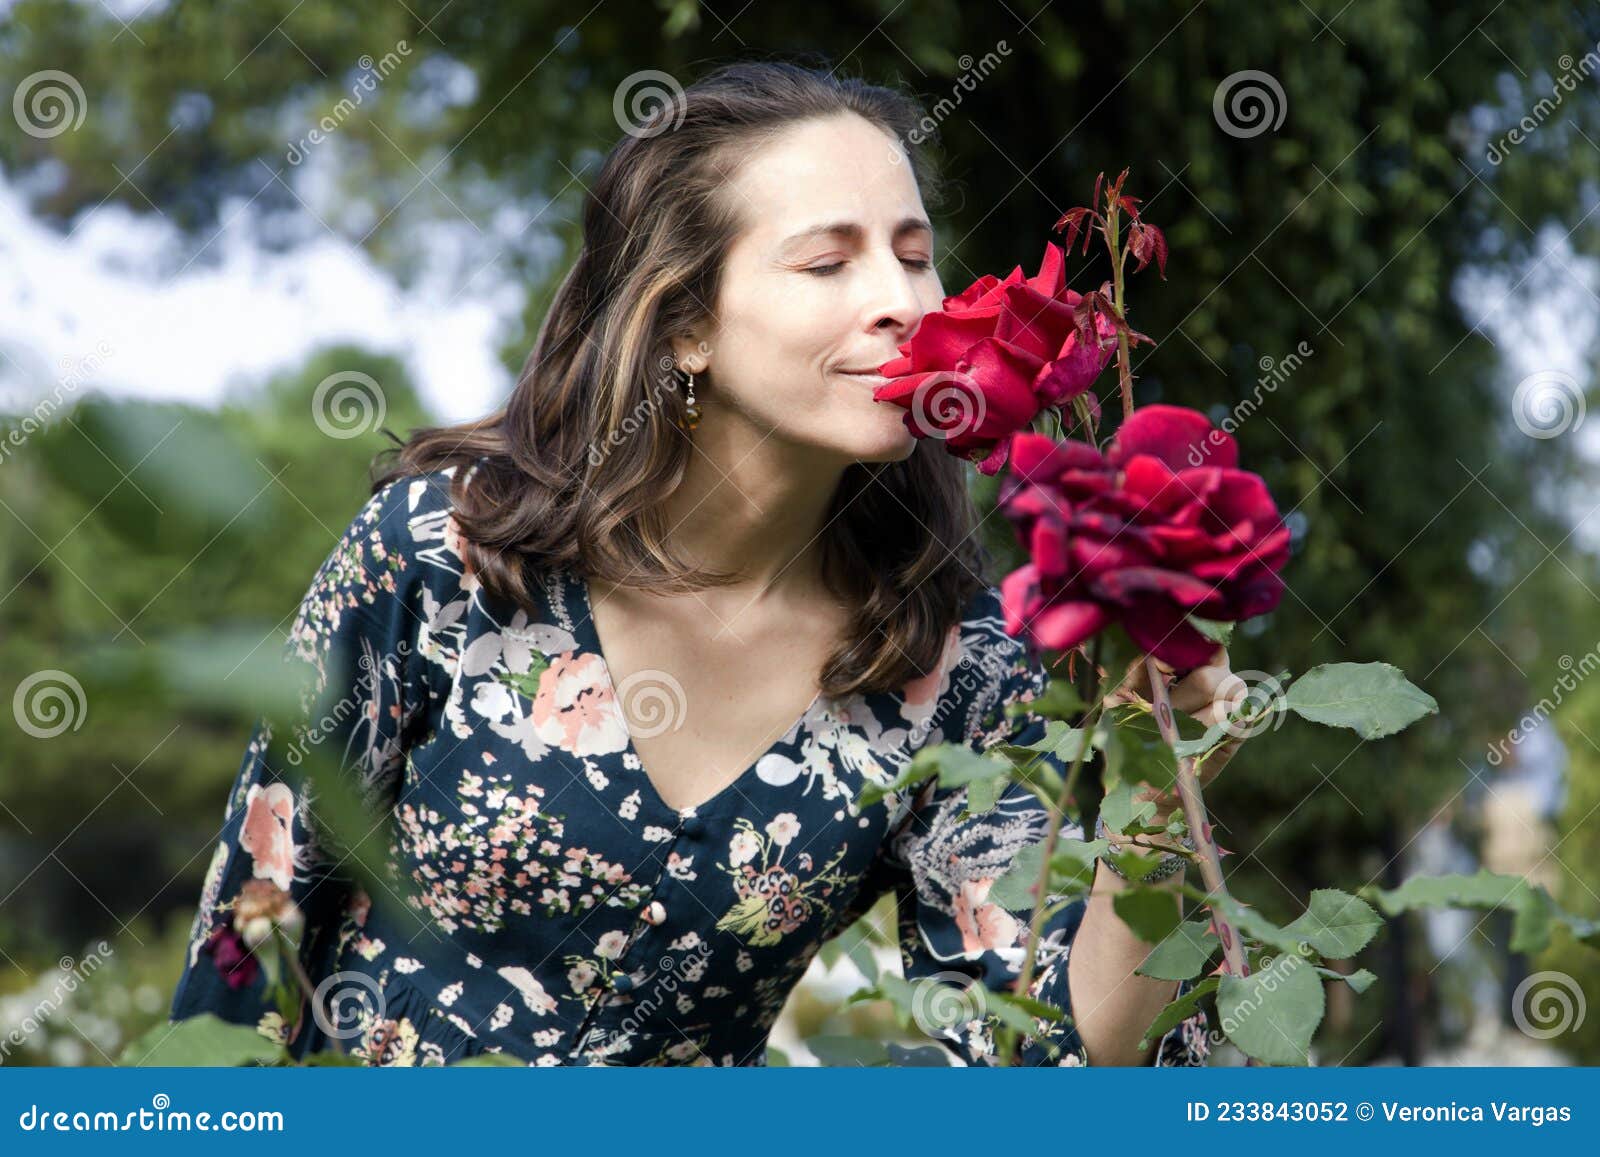 Woman Smelling A Rose With Her Eyes Closed Stock Photo Image Of Green